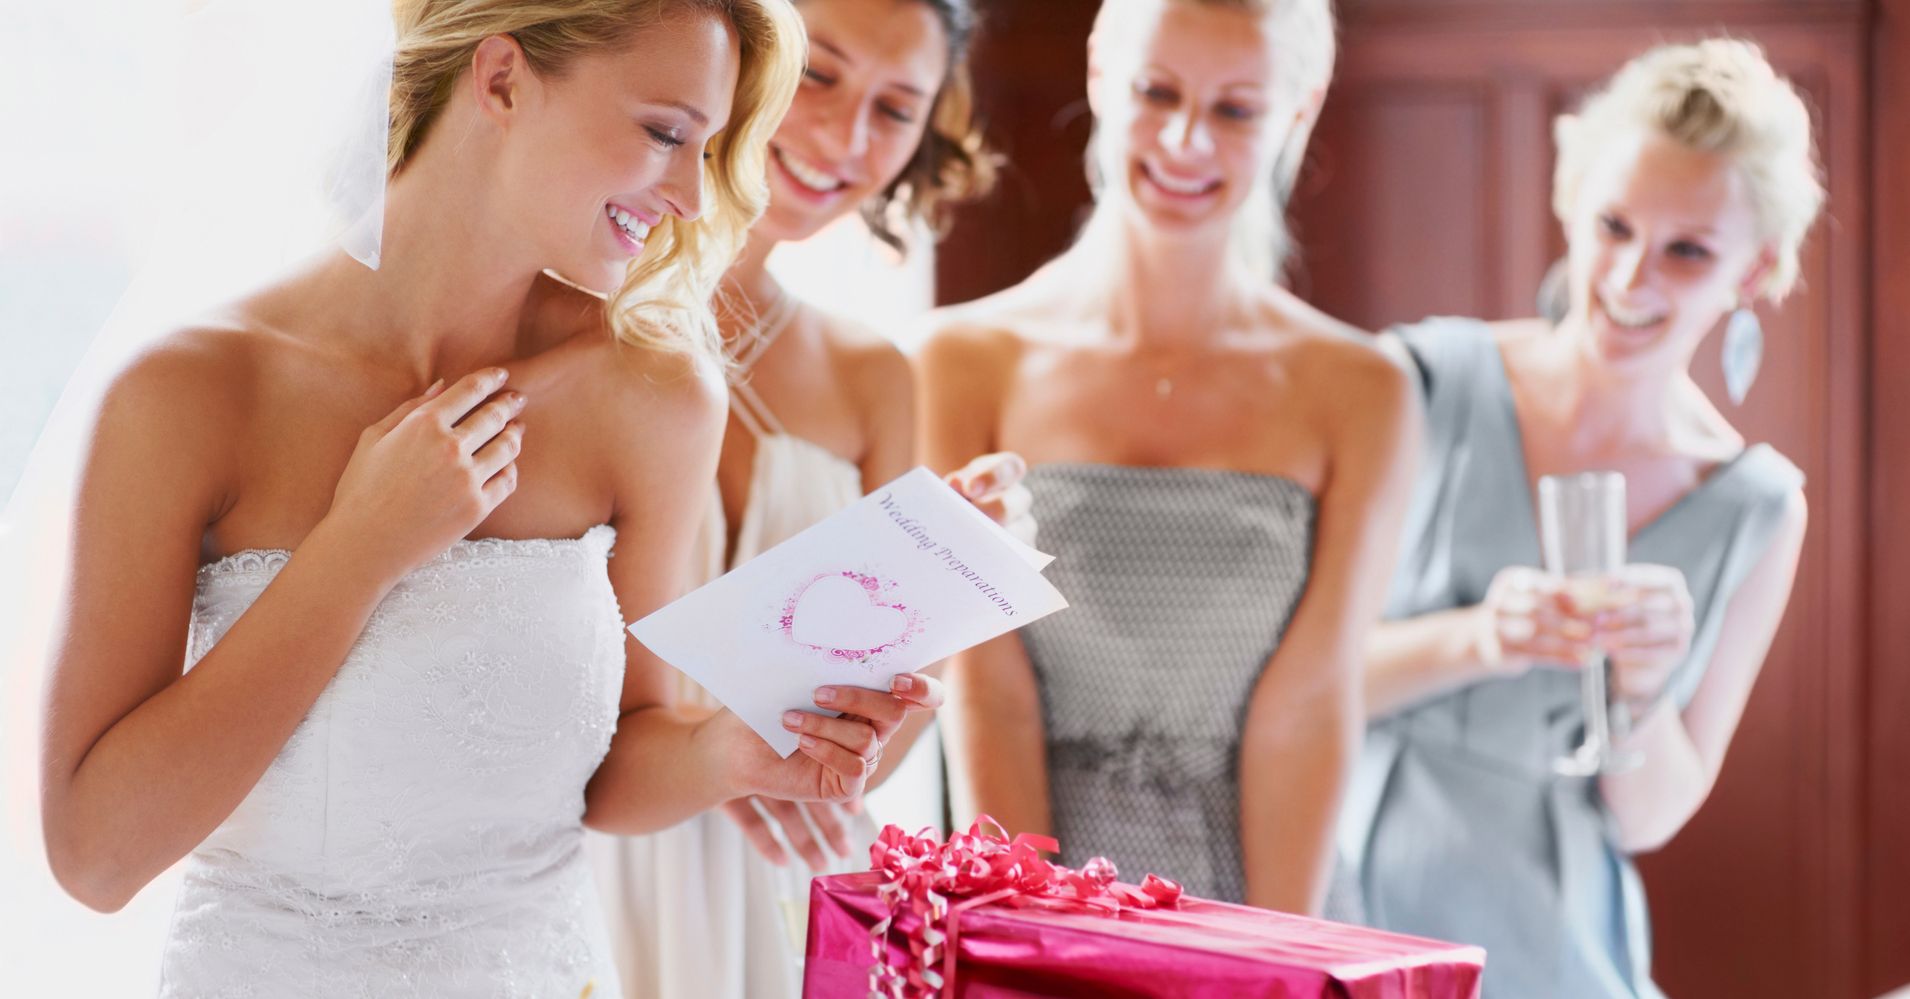 Exactly How Much Money To Give As A Wedding Gift Here Are 11 Factors